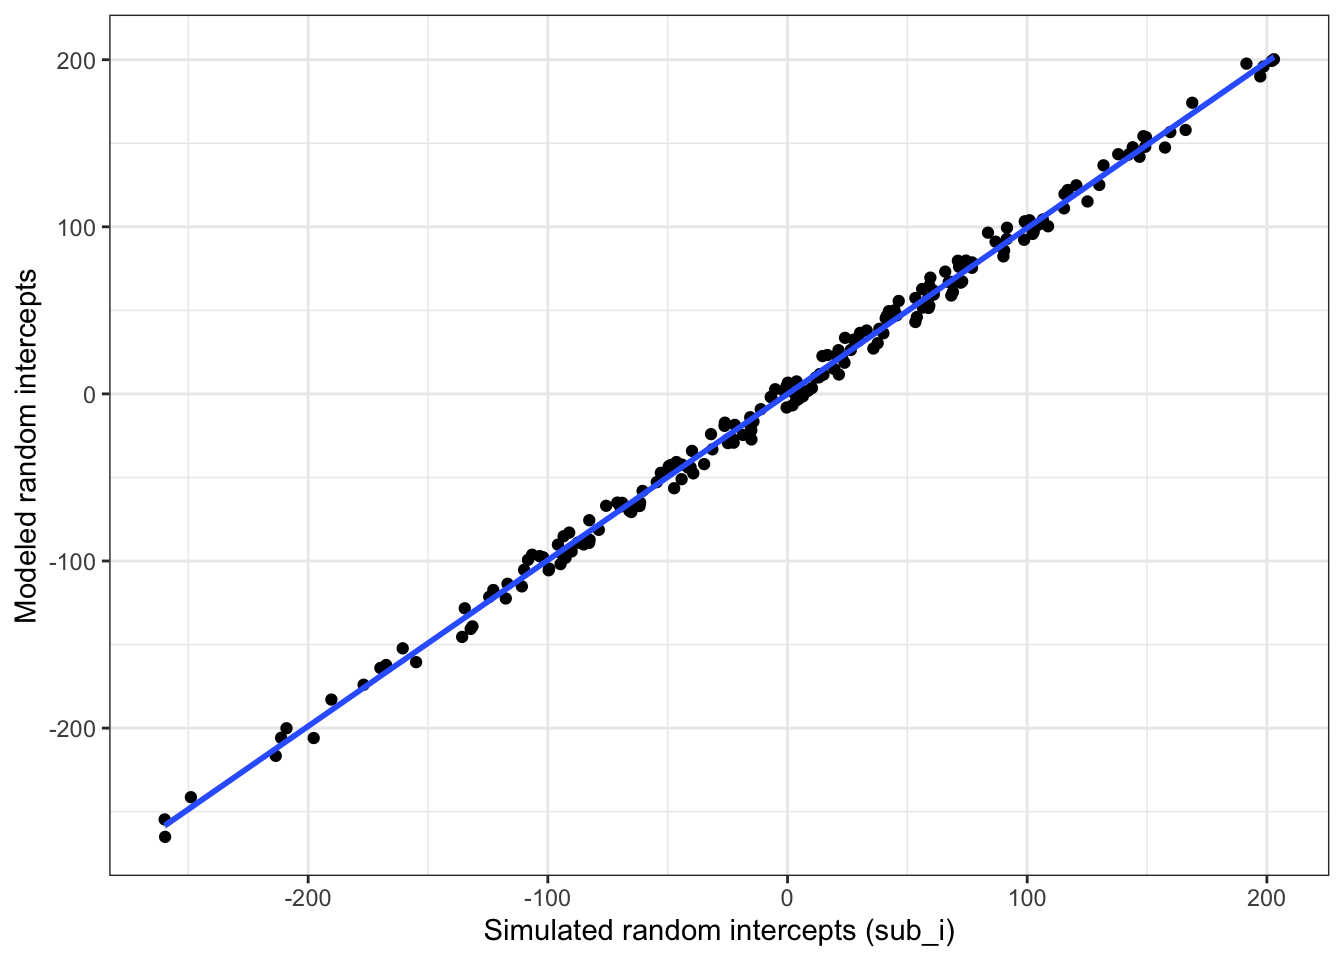 Compare simulated subject random intercepts to those from the model